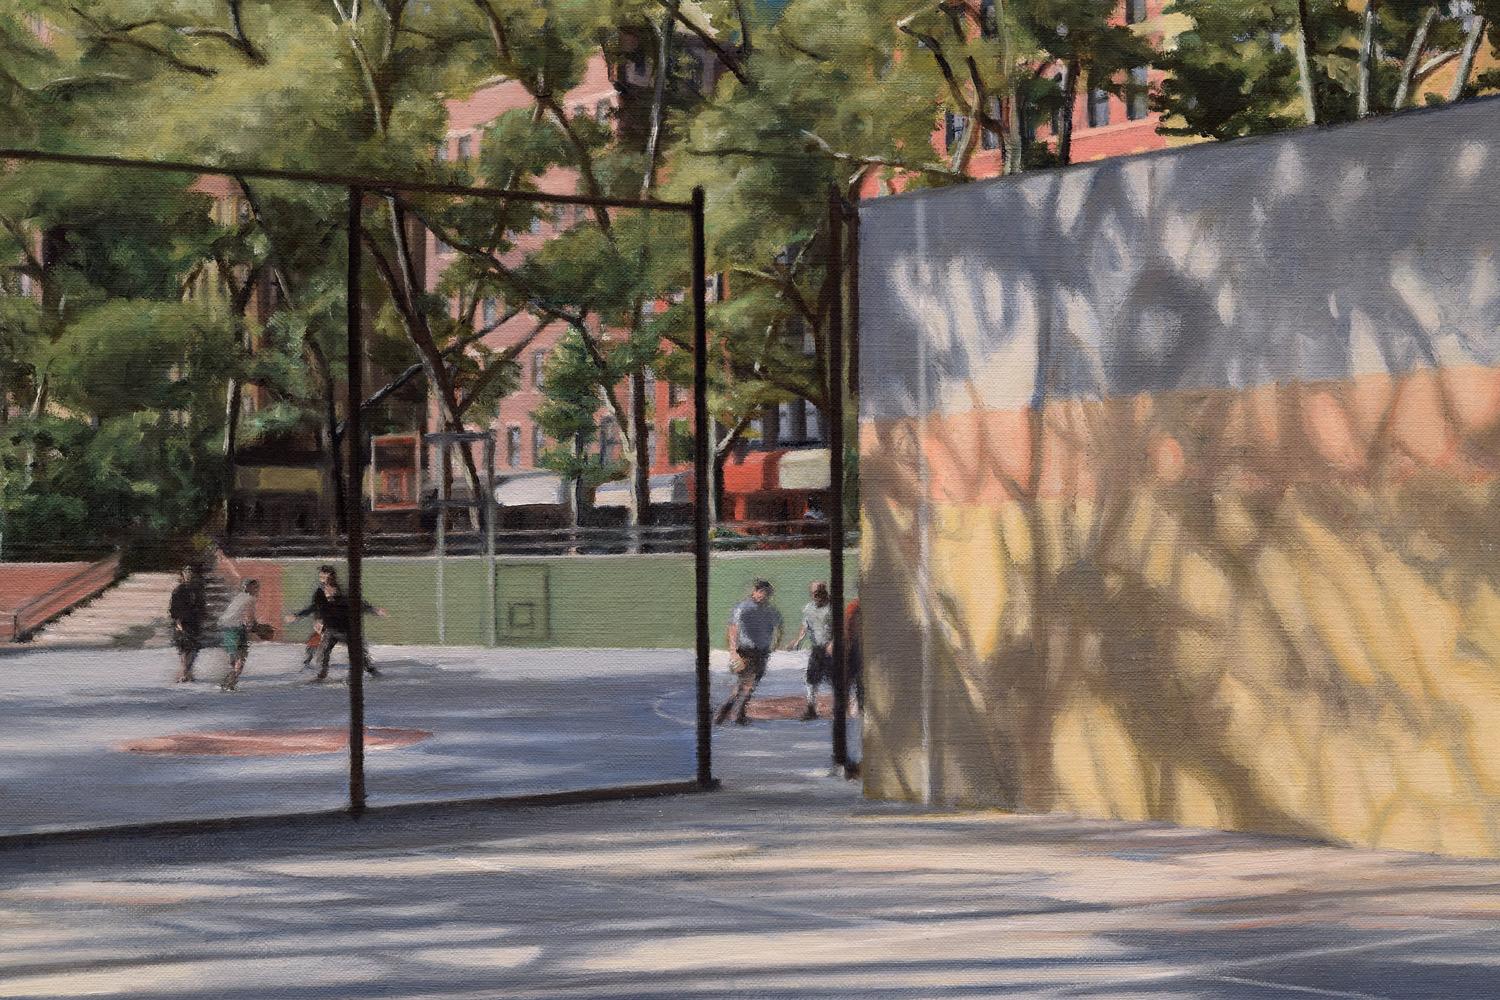 <p>Artist Comments<br>Artist Nick Savides presents a realistic scene of Sara D. Roosevelt Park on the Lower East Side. Kids play ball in the background as Nick focuses on the empty court in the foreground. The morning sunbeams on the trees, casting